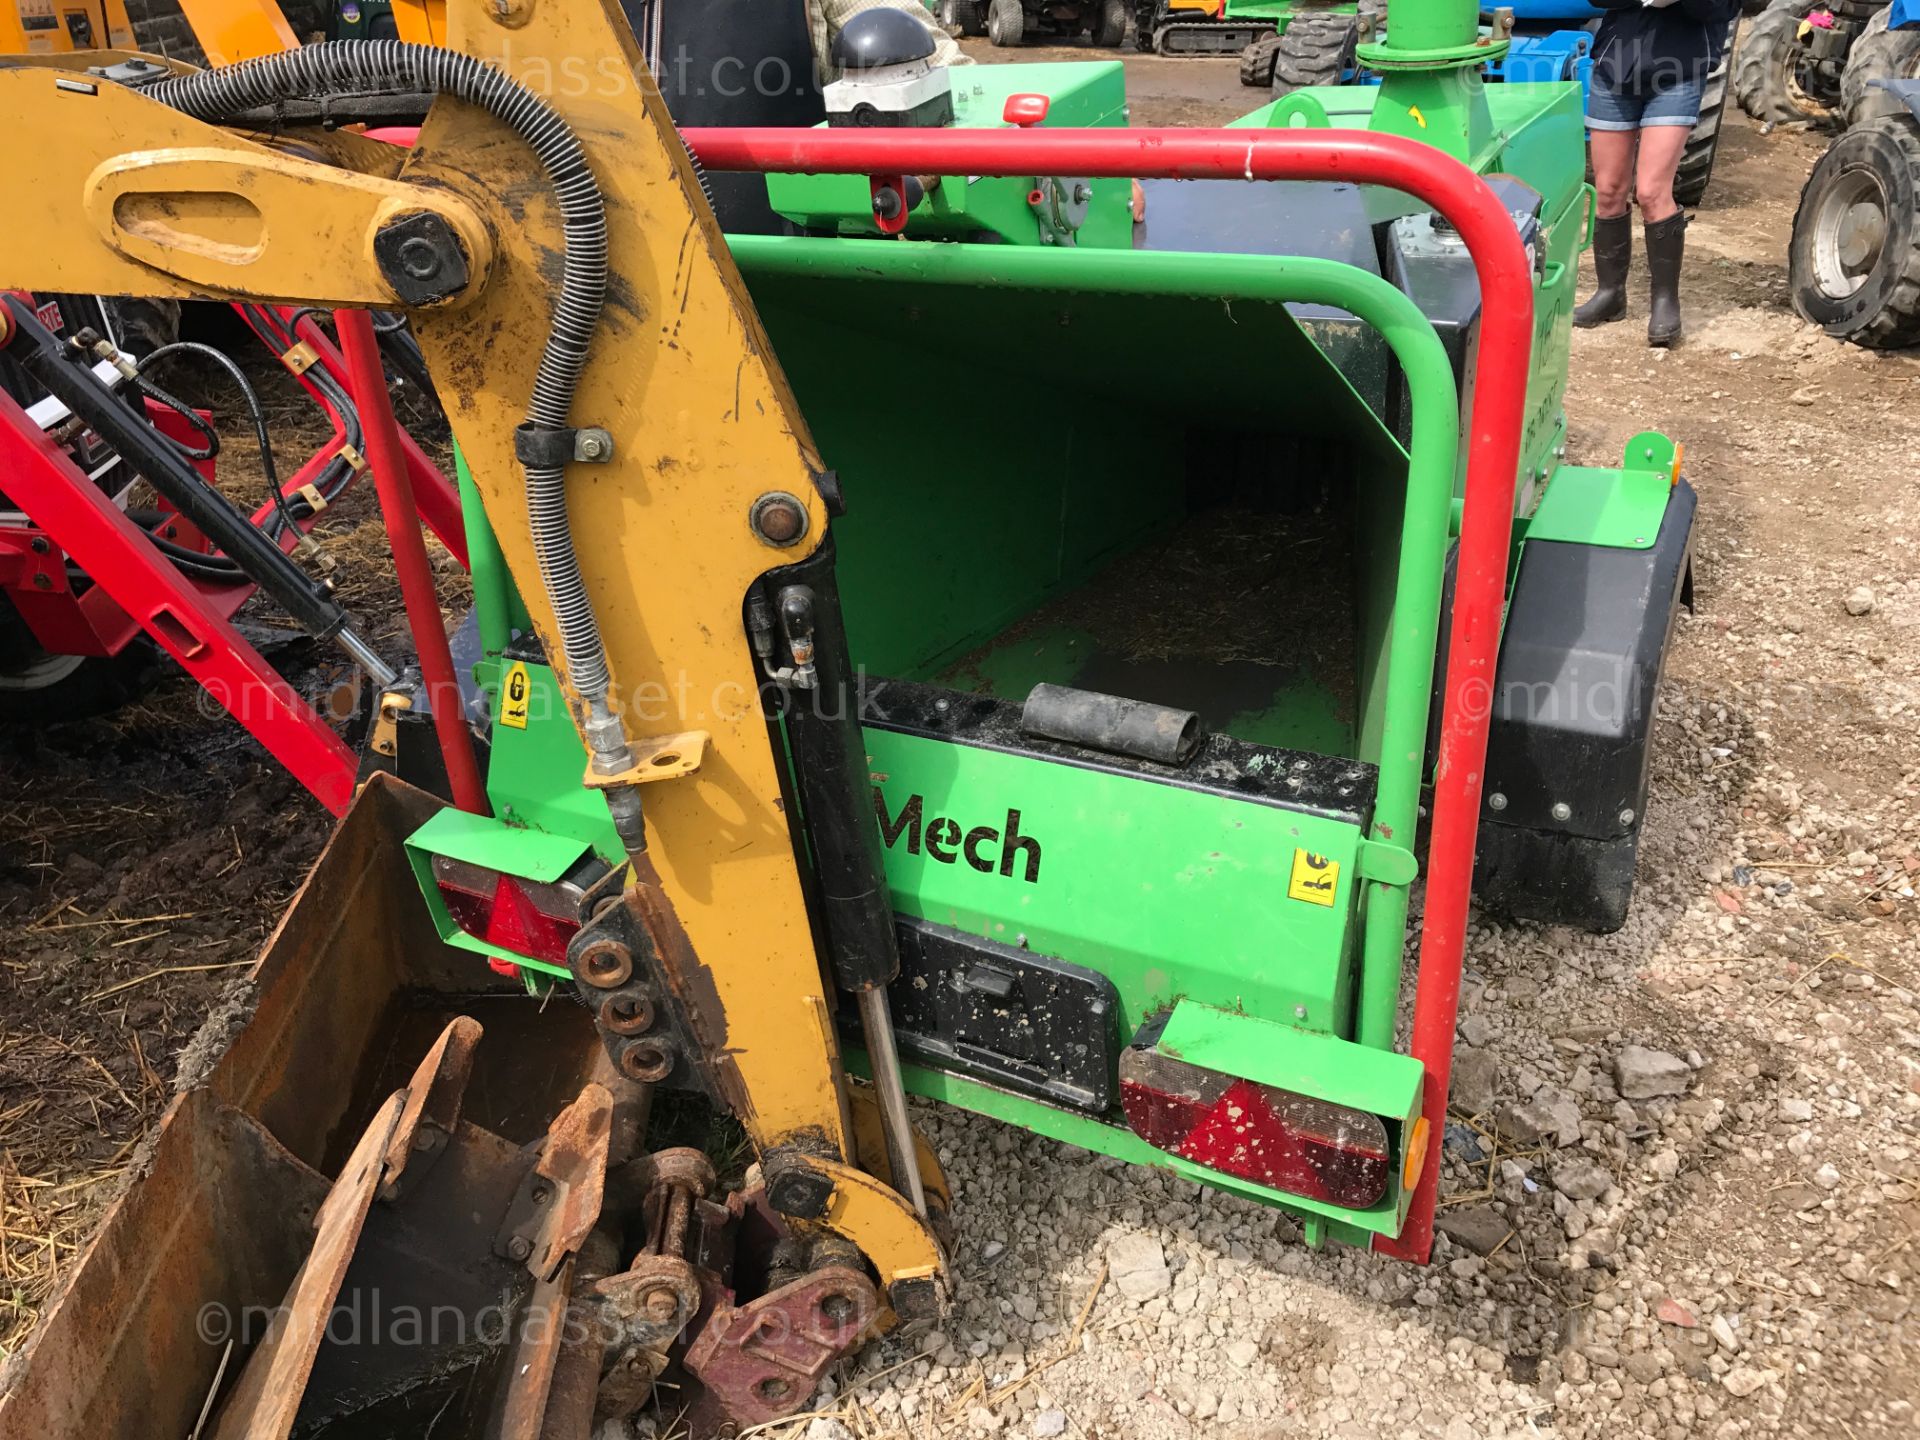 FAB CONDITION GREENMACH 150 ARBORIST WOODCHIPPER - TOWABLE - LIKE NEW CONDITION  VERY LOW HOURS - - Image 3 of 4